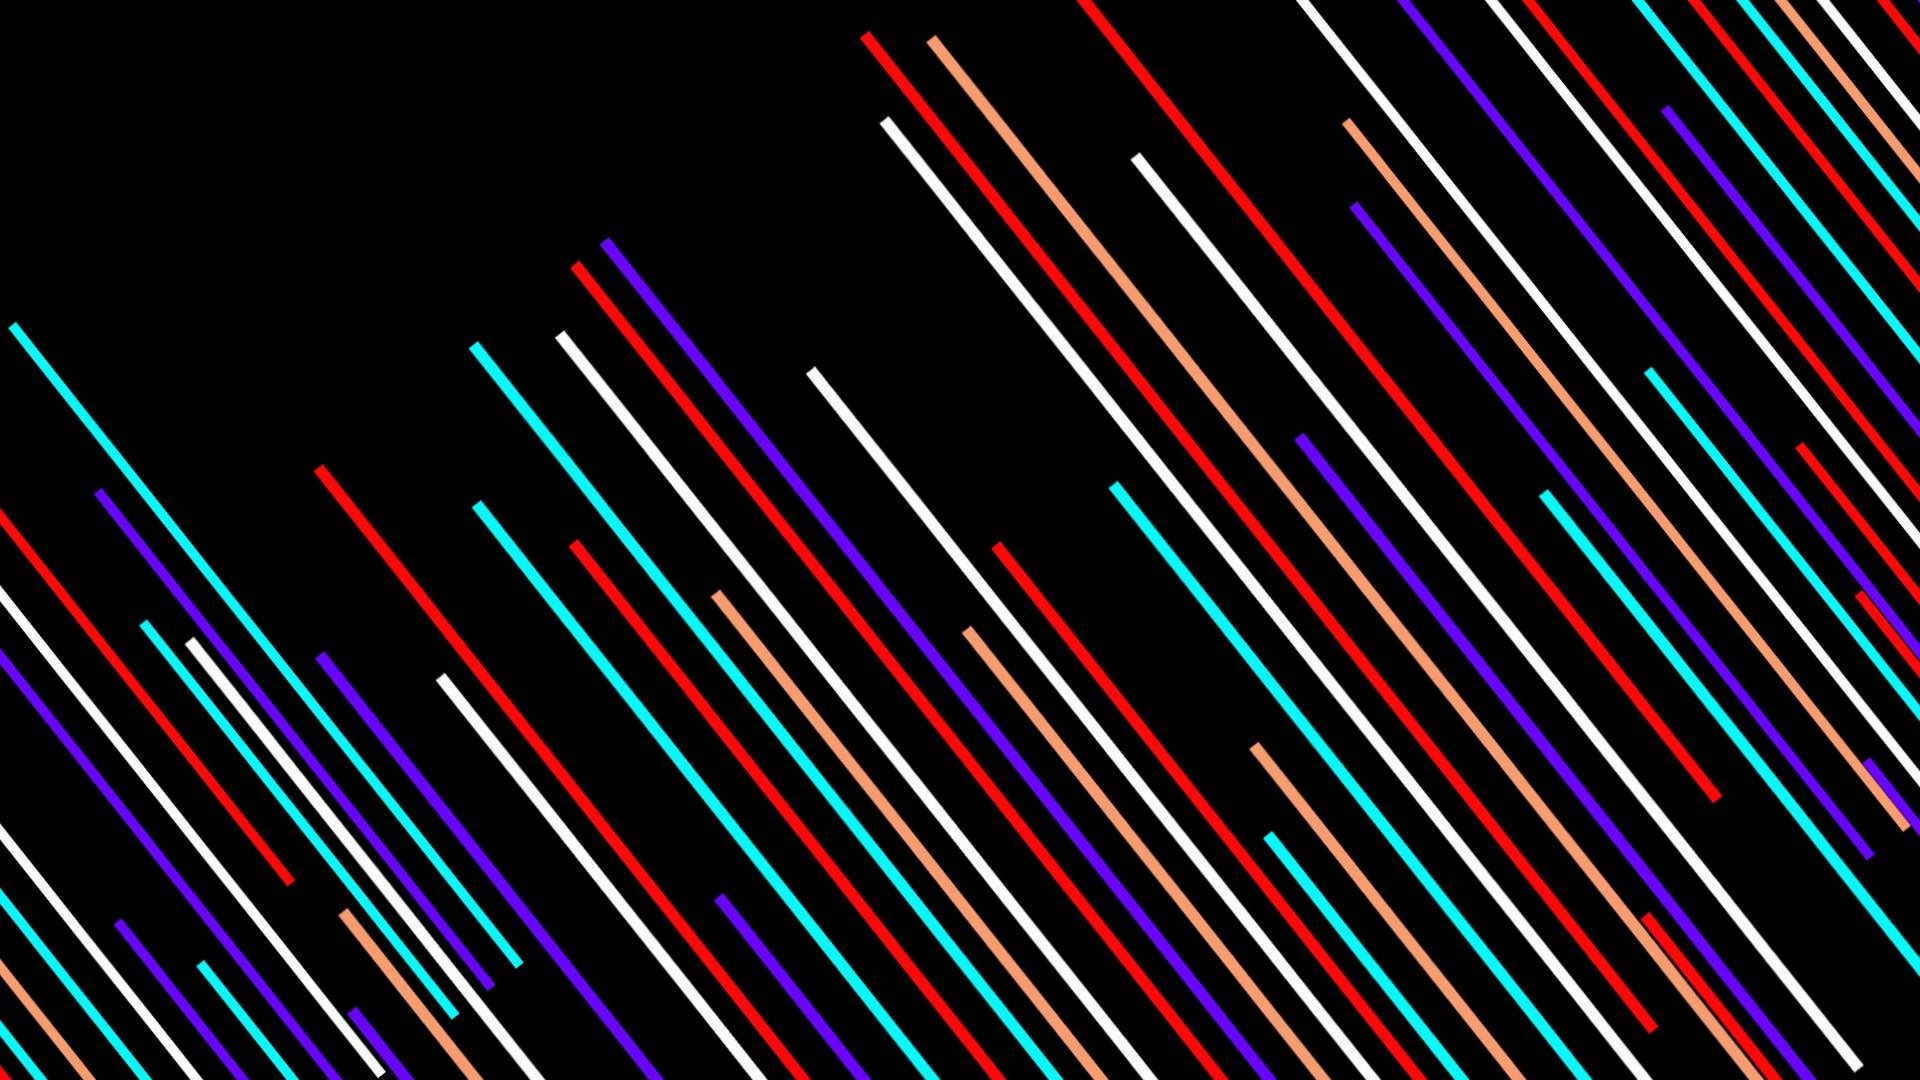 Lines wallpapers, Stunning backgrounds, Unique line art, Creative expression, 1920x1080 Full HD Desktop